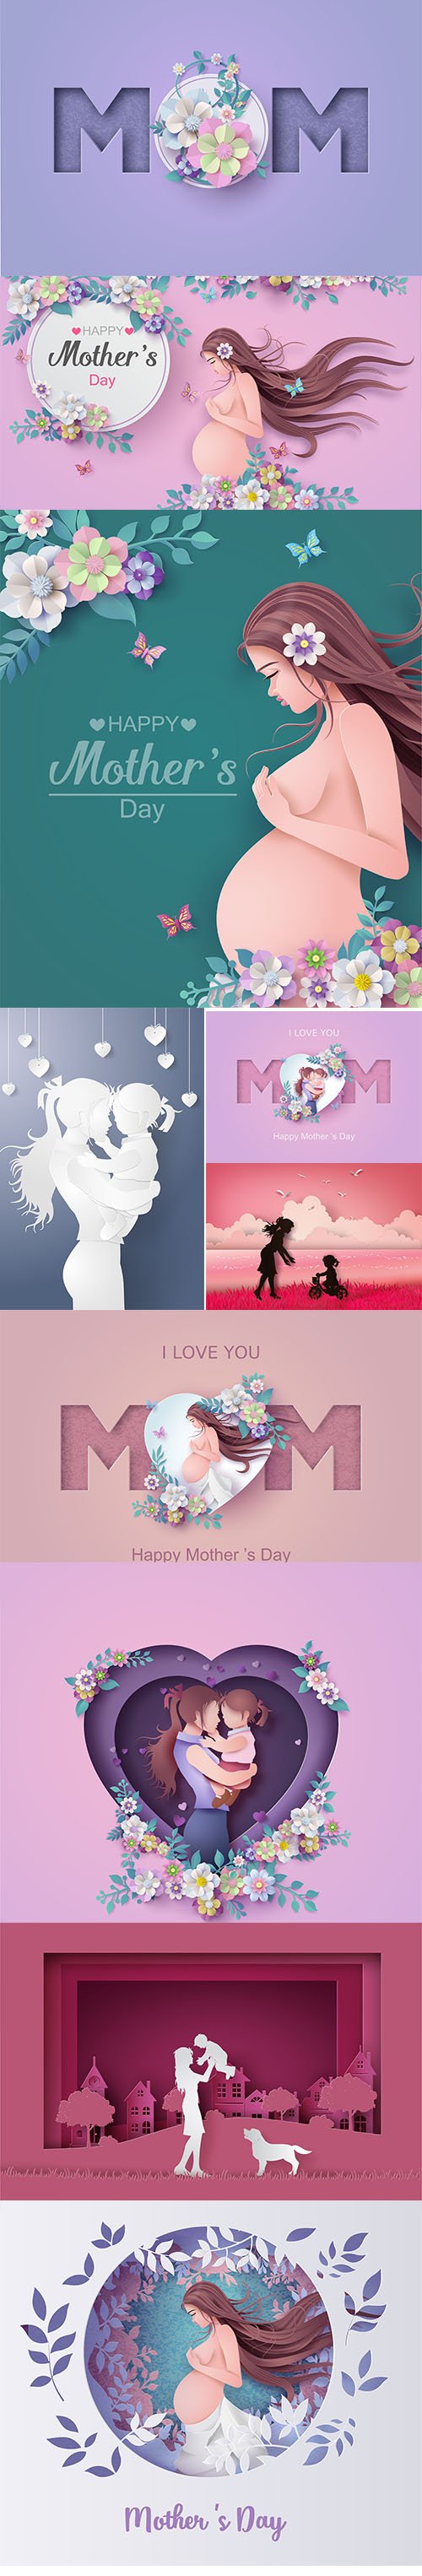 Happy Mothers Day Greeting Card Set